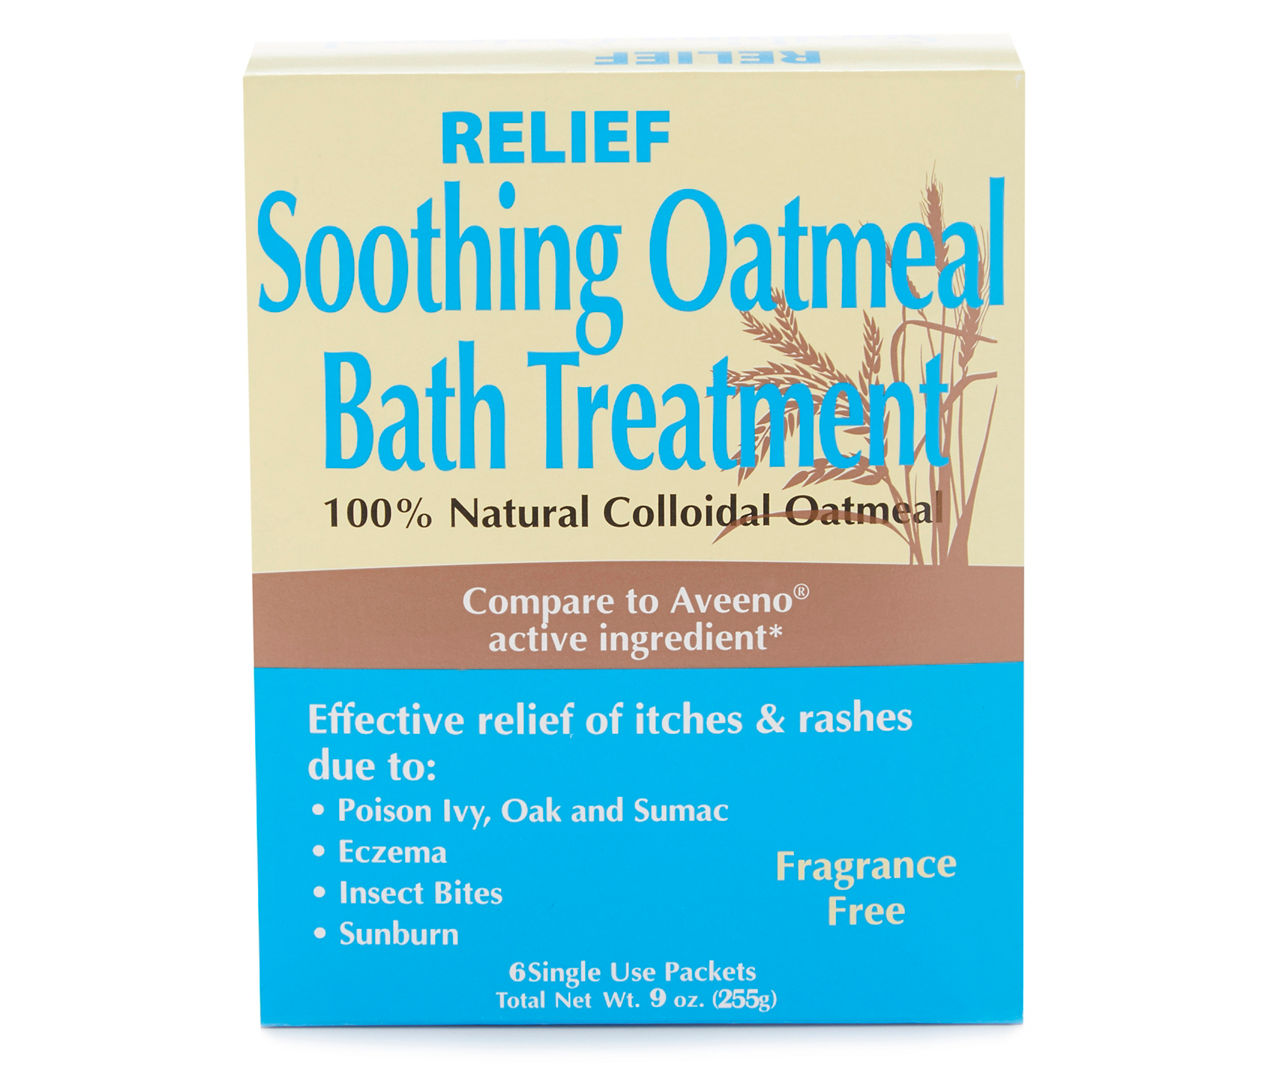 2x RELIEF Soothing 100% Natural Colloidal OATMEAL Bath Treatment